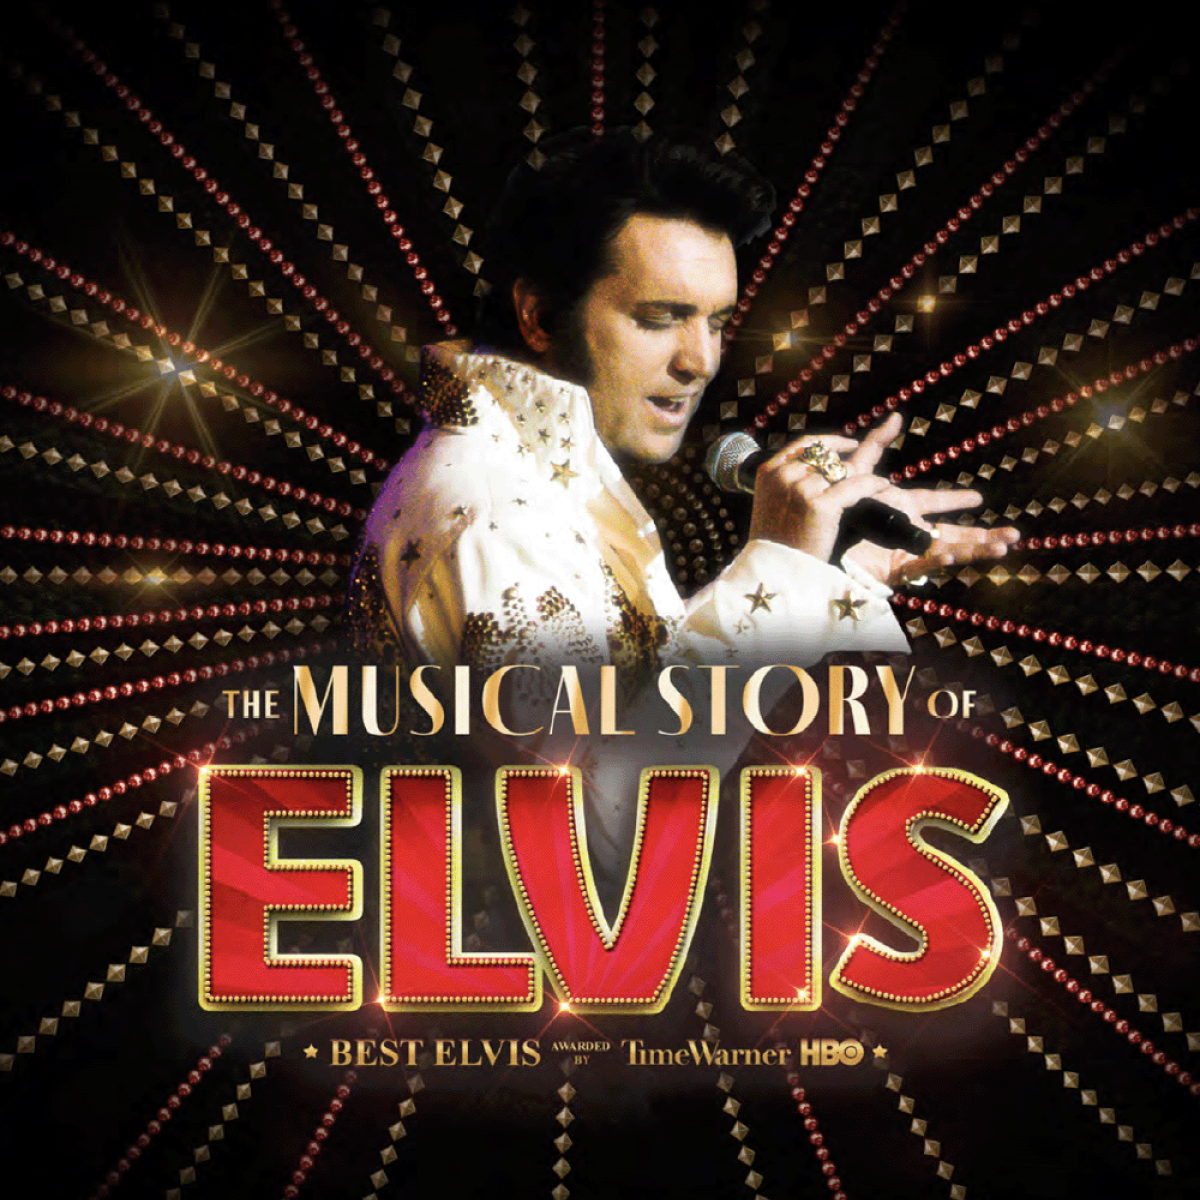 The Musical Story Of Elvis at Casino Barriere Toulouse Tickets